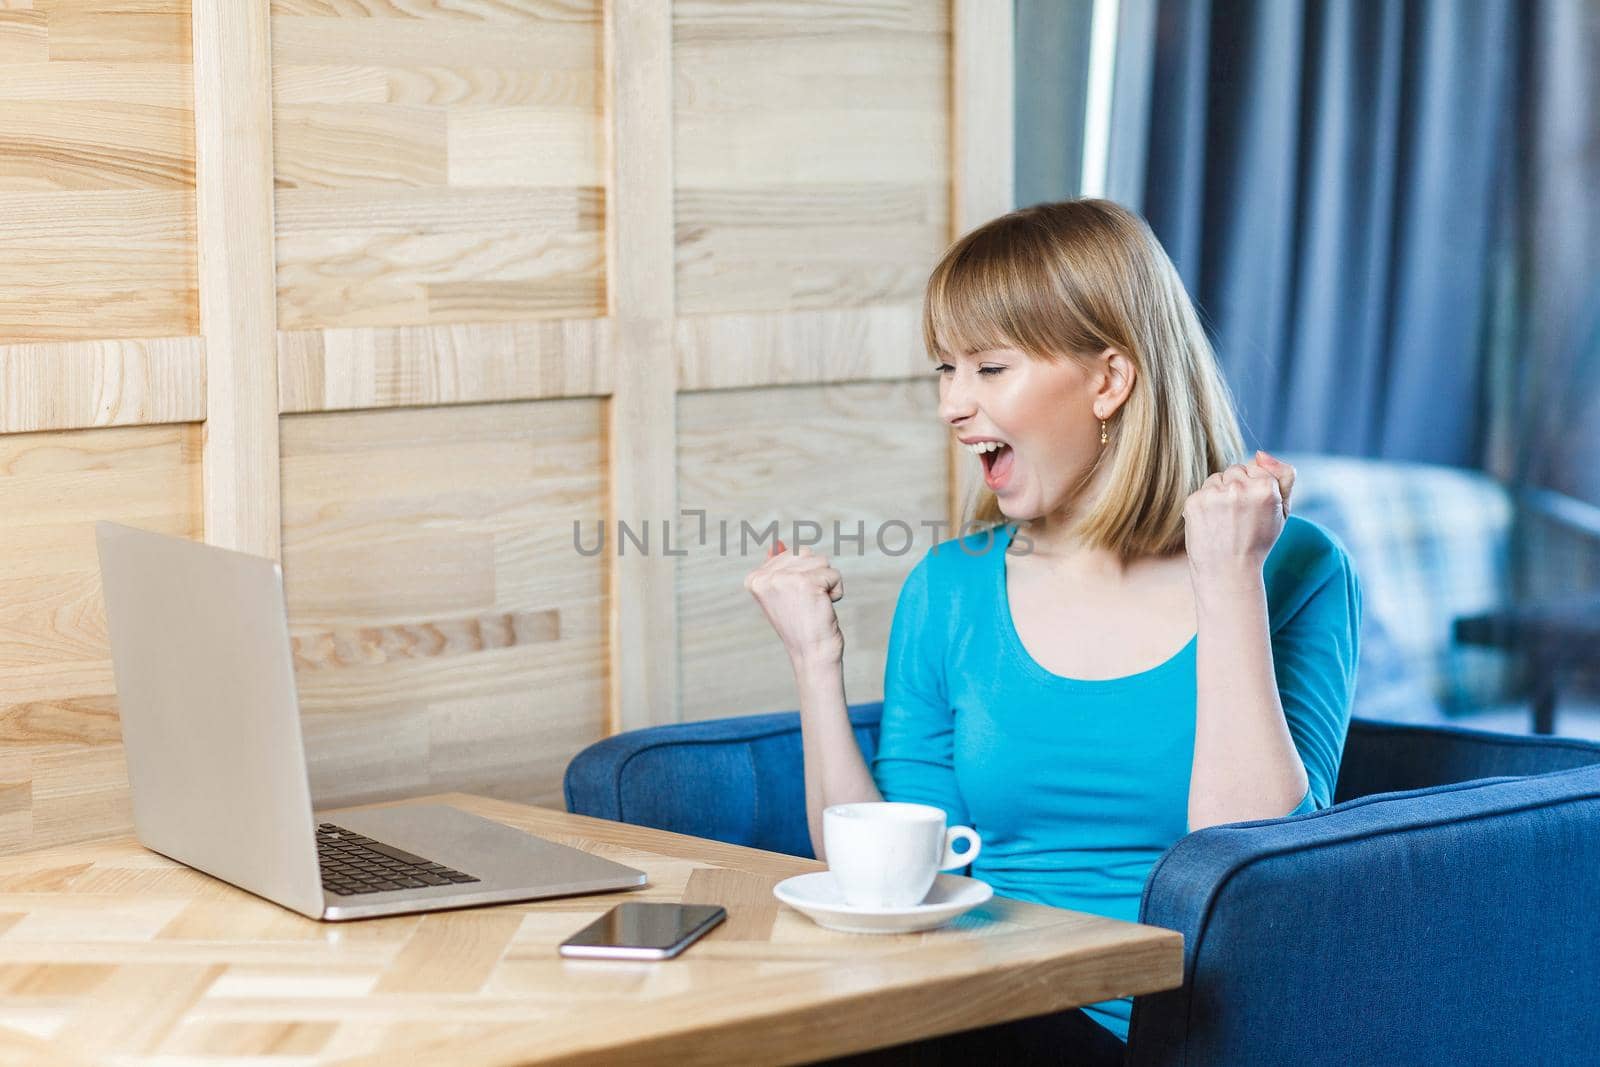 Emotional worker woman in blue shirt sitting and working on computer by Khosro1